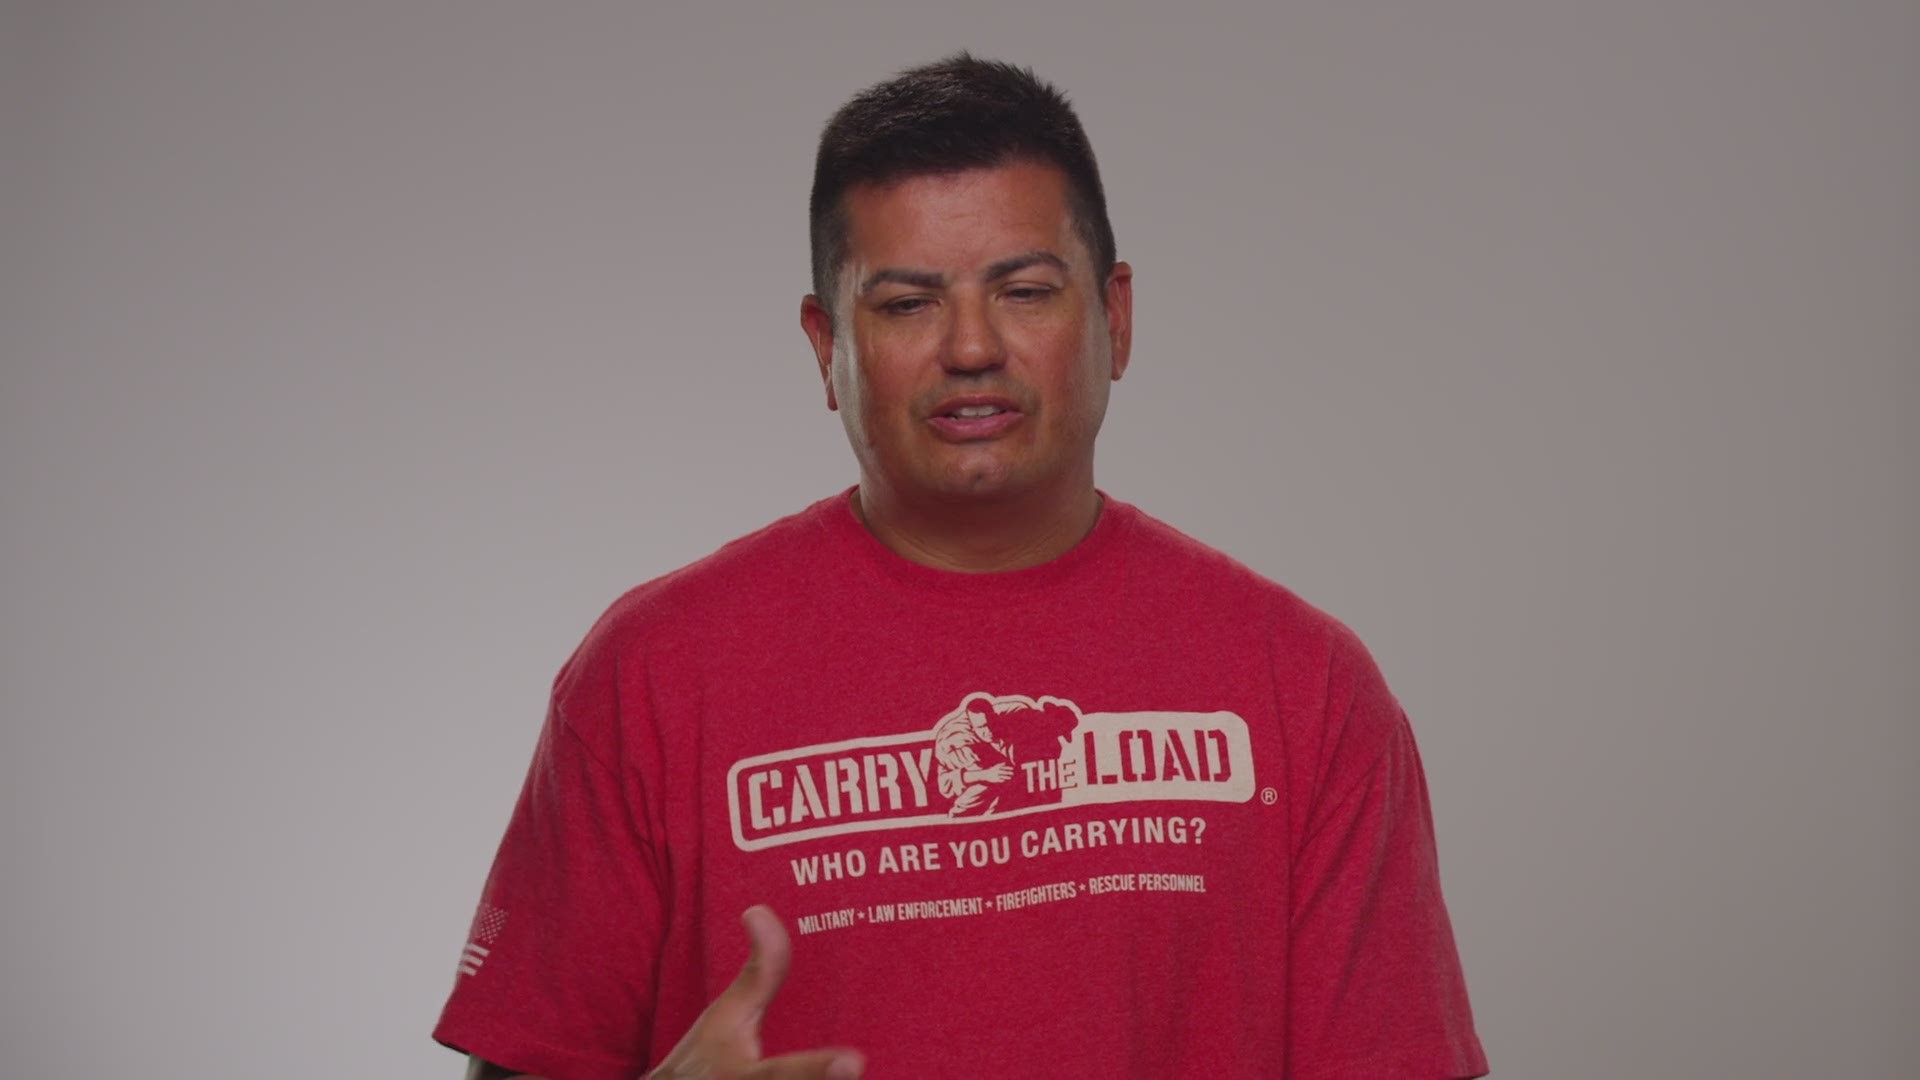 David Garay talks about his reason for participating in Carry the Load.